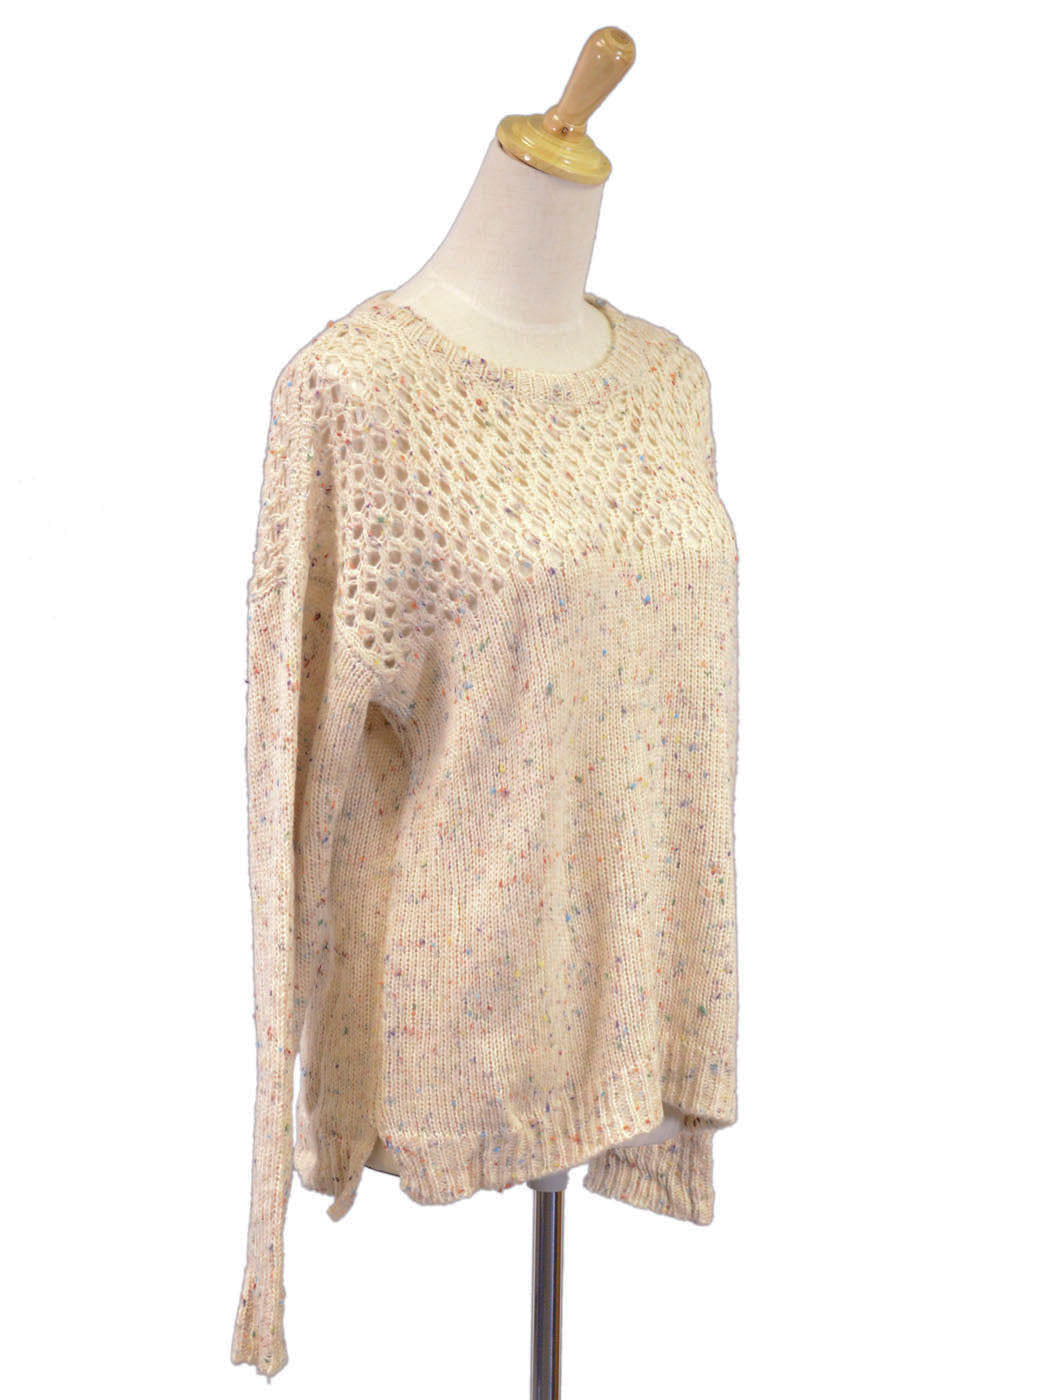 Lush Oversized Long Sleeved Speckled Knit Jumper With Loose Knit Neckline - ALILANG.COM